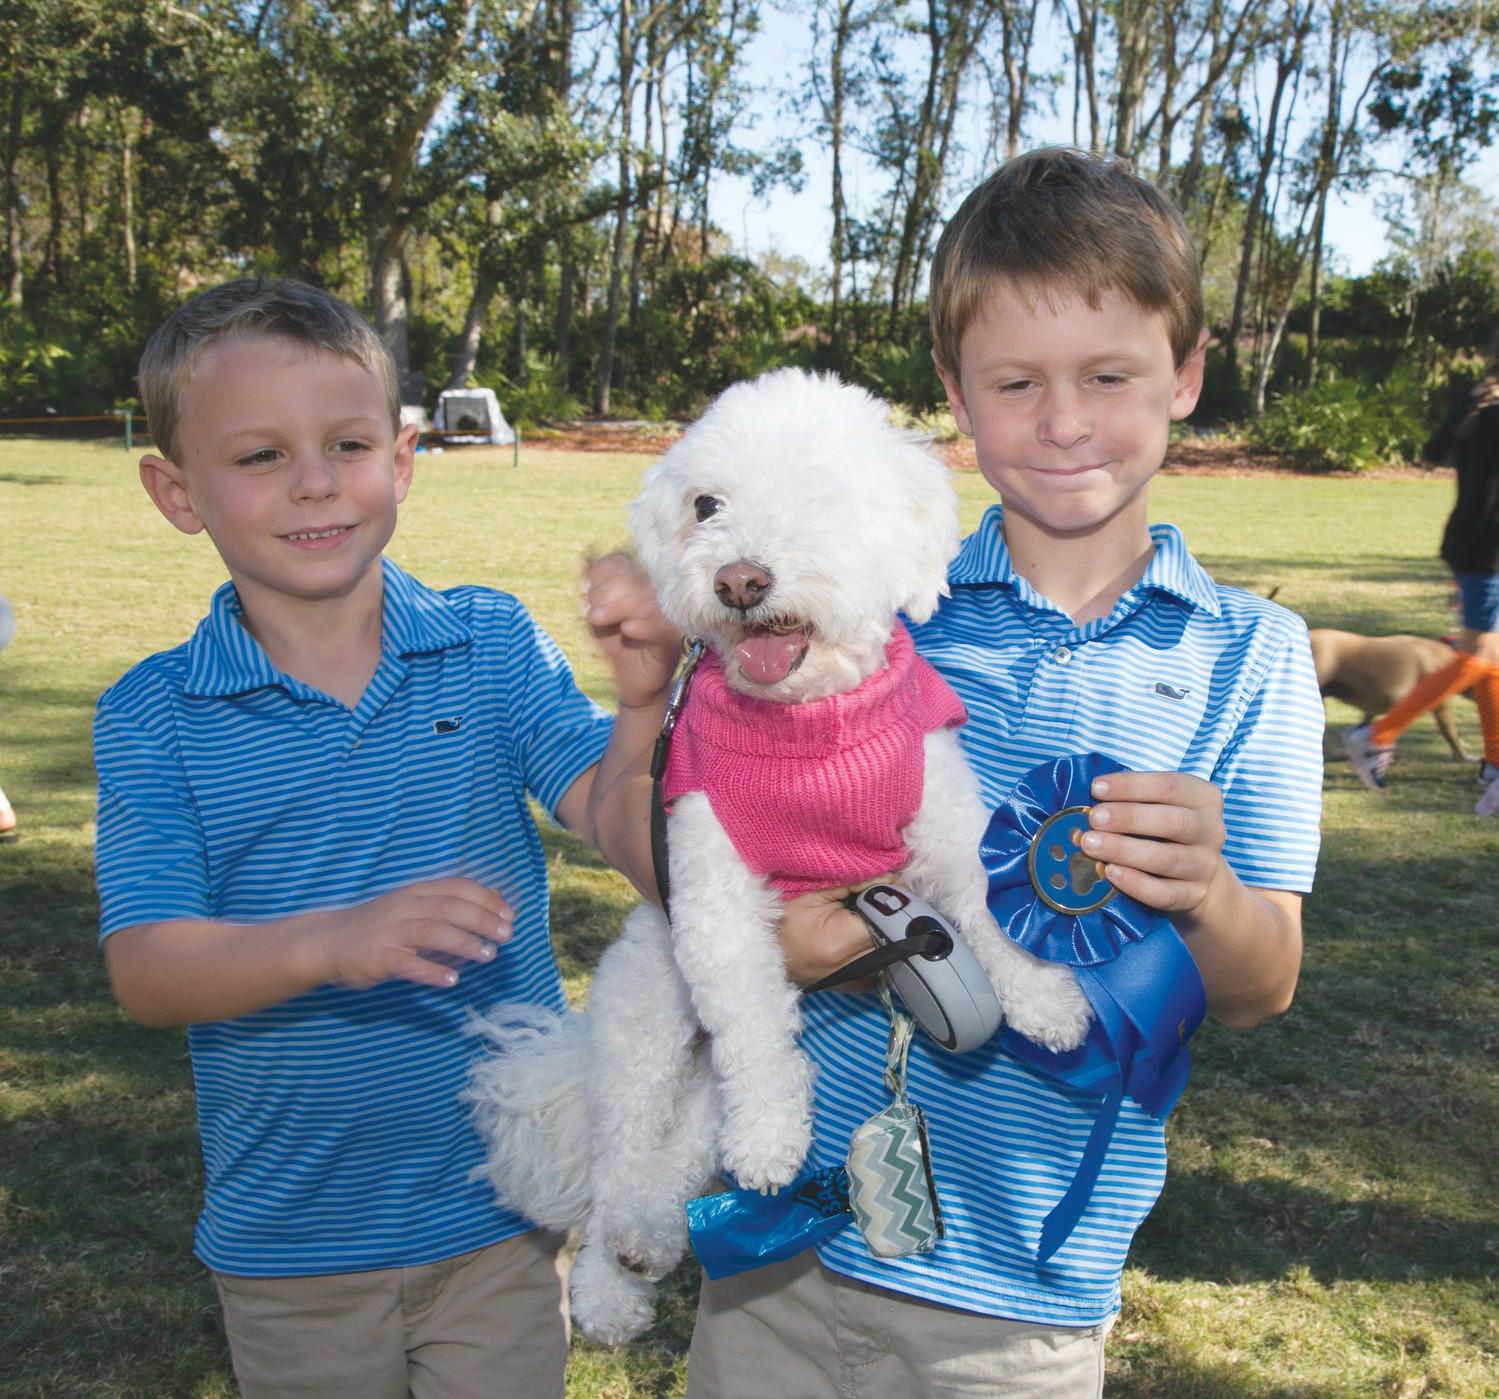 Knox, Memphis and Nash Cartwright enjoy Bark in the Park at the Plantation at Ponte Vedra Beach Nov. 4. The event benefited the Plantation Foundation, a scholarship fund for employees and dependents of employees. The day included a dog agility demonstration, a friendly dog show, a photo booth for pets, a mobile pet Groomer, a SAFE pet rescue van, music, refreshments and a raffle to benefit the Plantation Foundation.